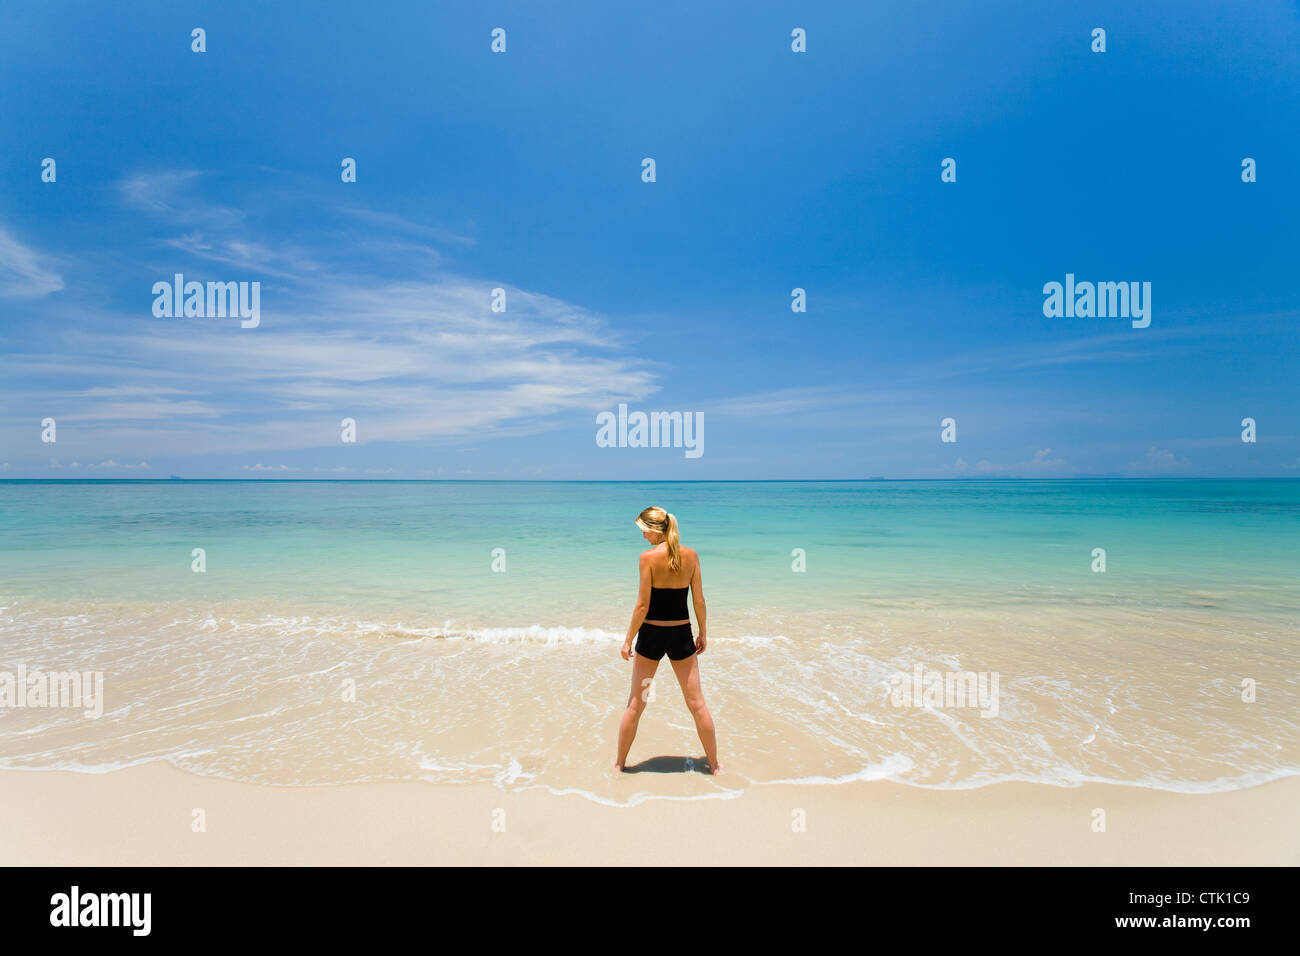 A Woman Tourist Stands In The Shallow Clear Waters Of A Tropical Island; Koh Lanta,Thailand Stock Photo